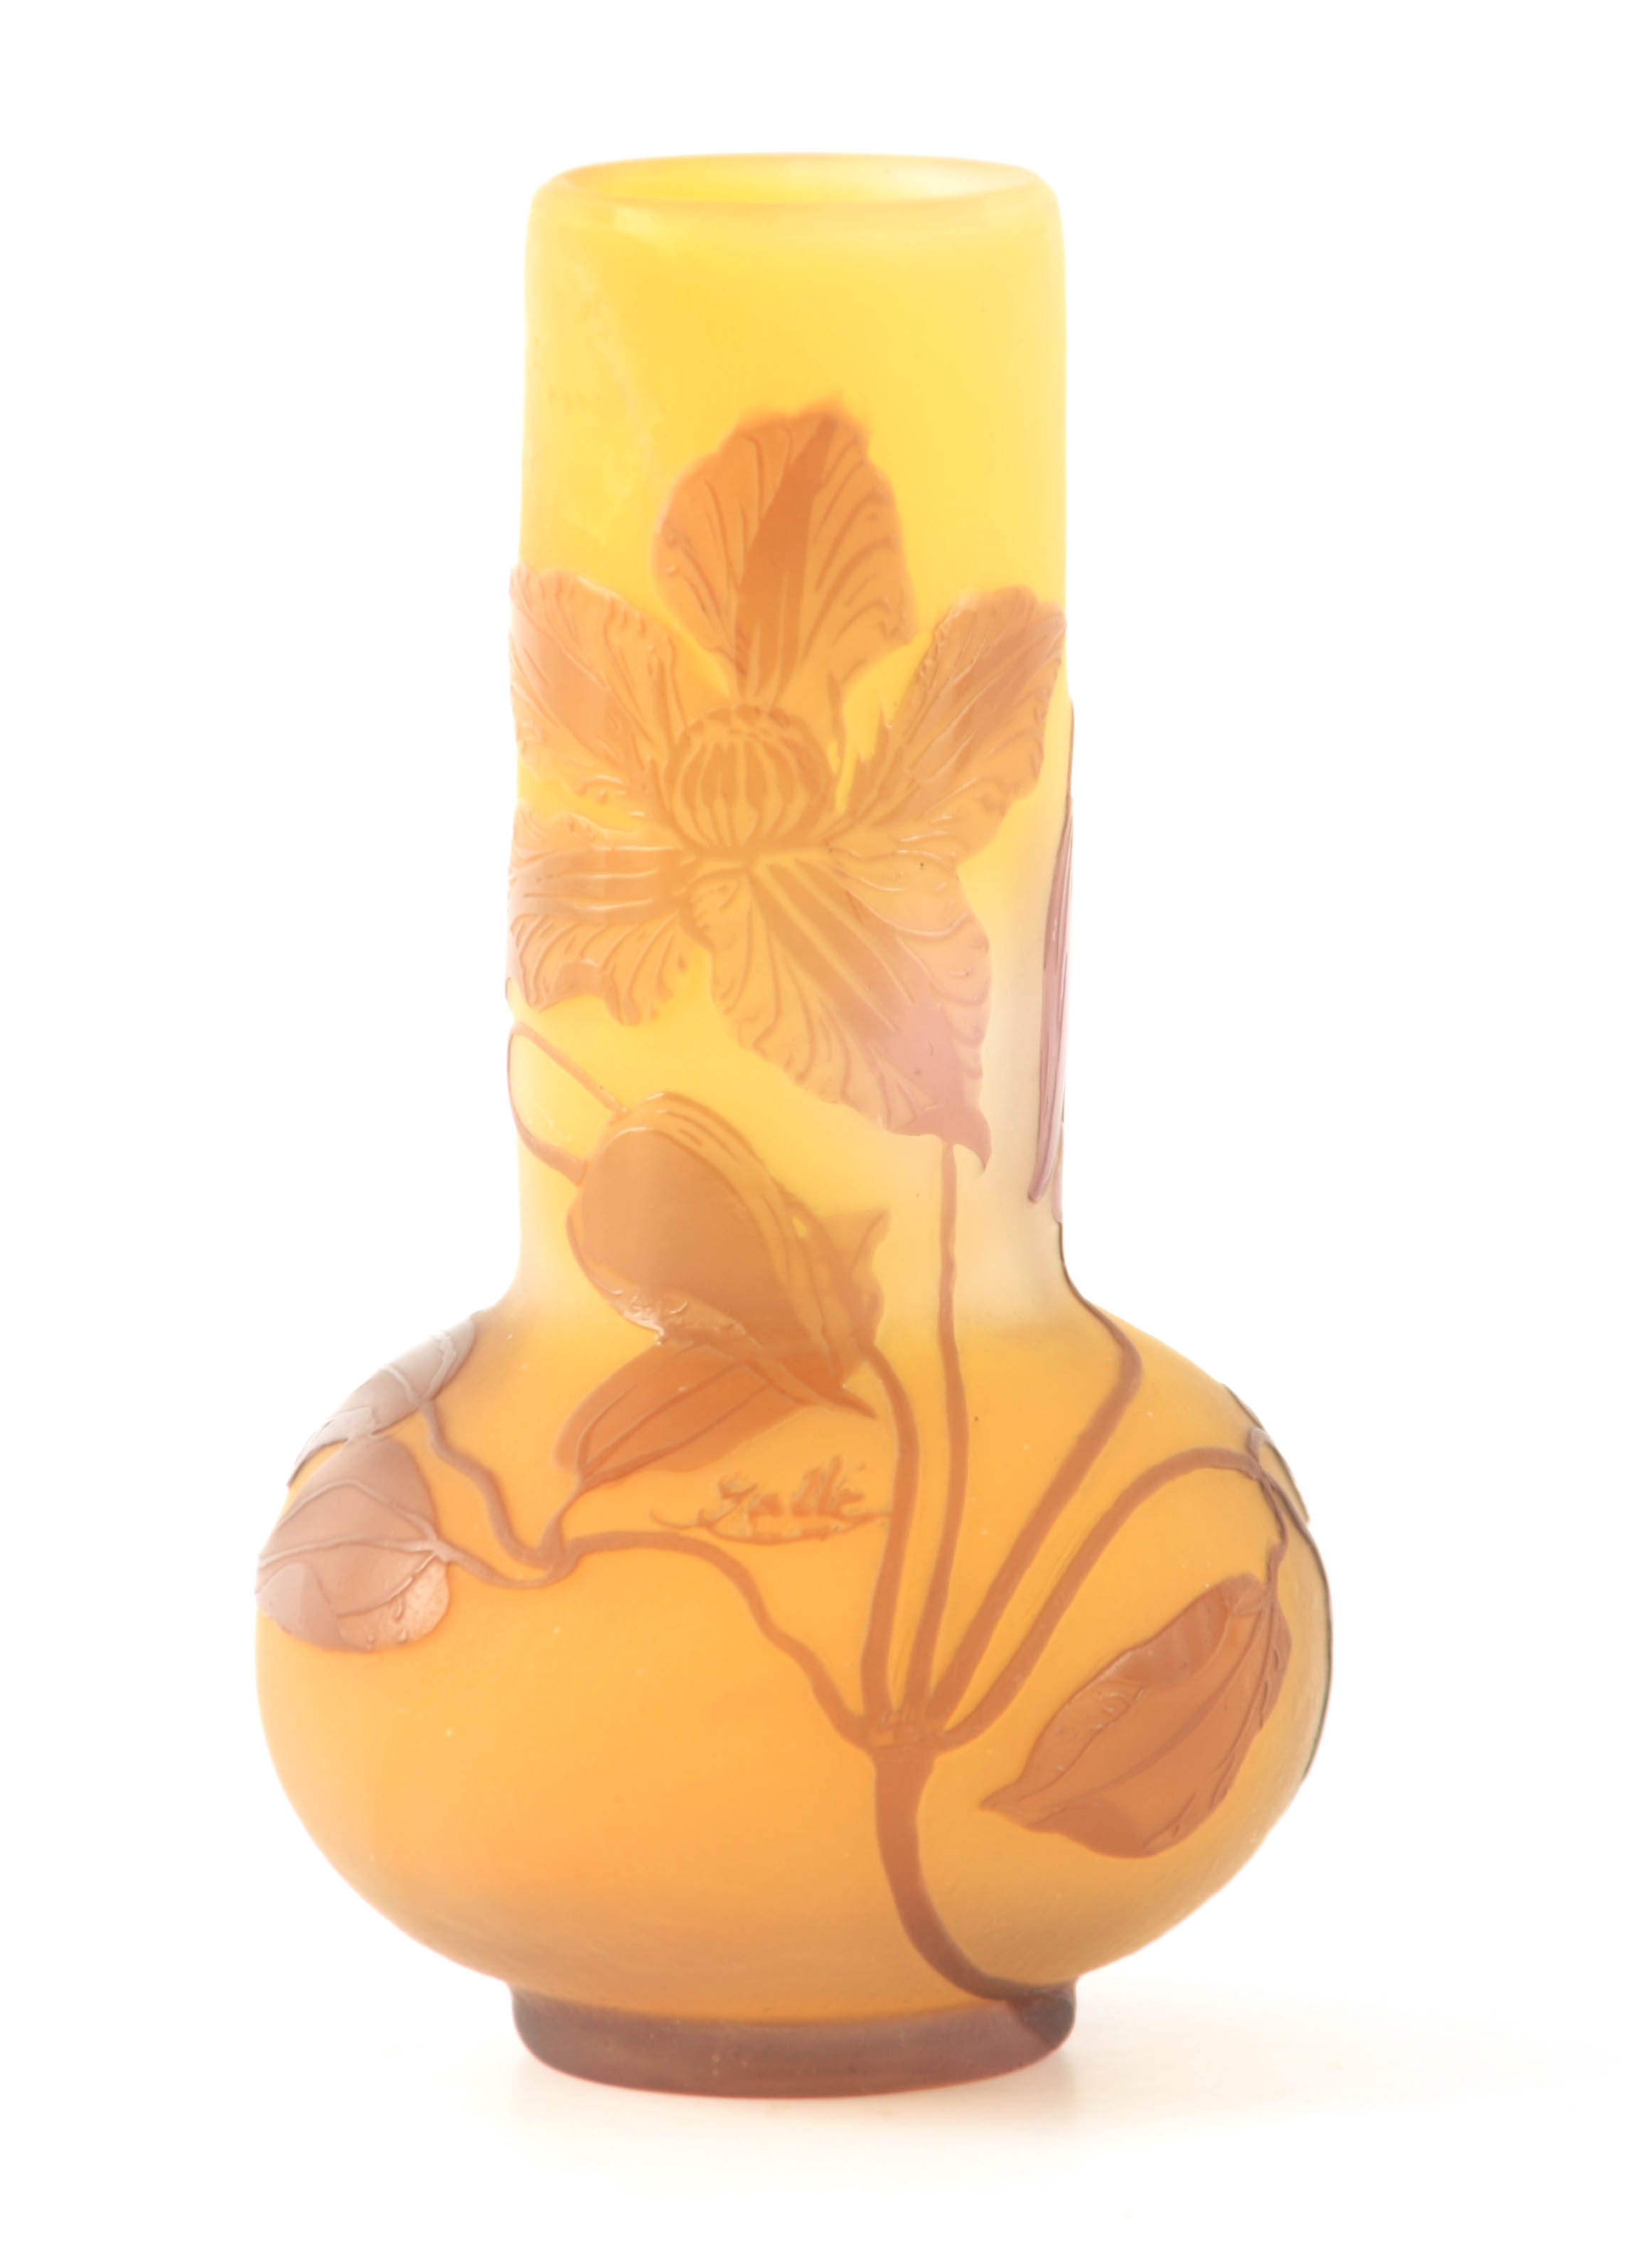 AN ART NOUVEAU GALLE OVERLAY SQUAT BULBOUS CABINET VASE WITH CYLINDRICAL NECK decorated in sepia